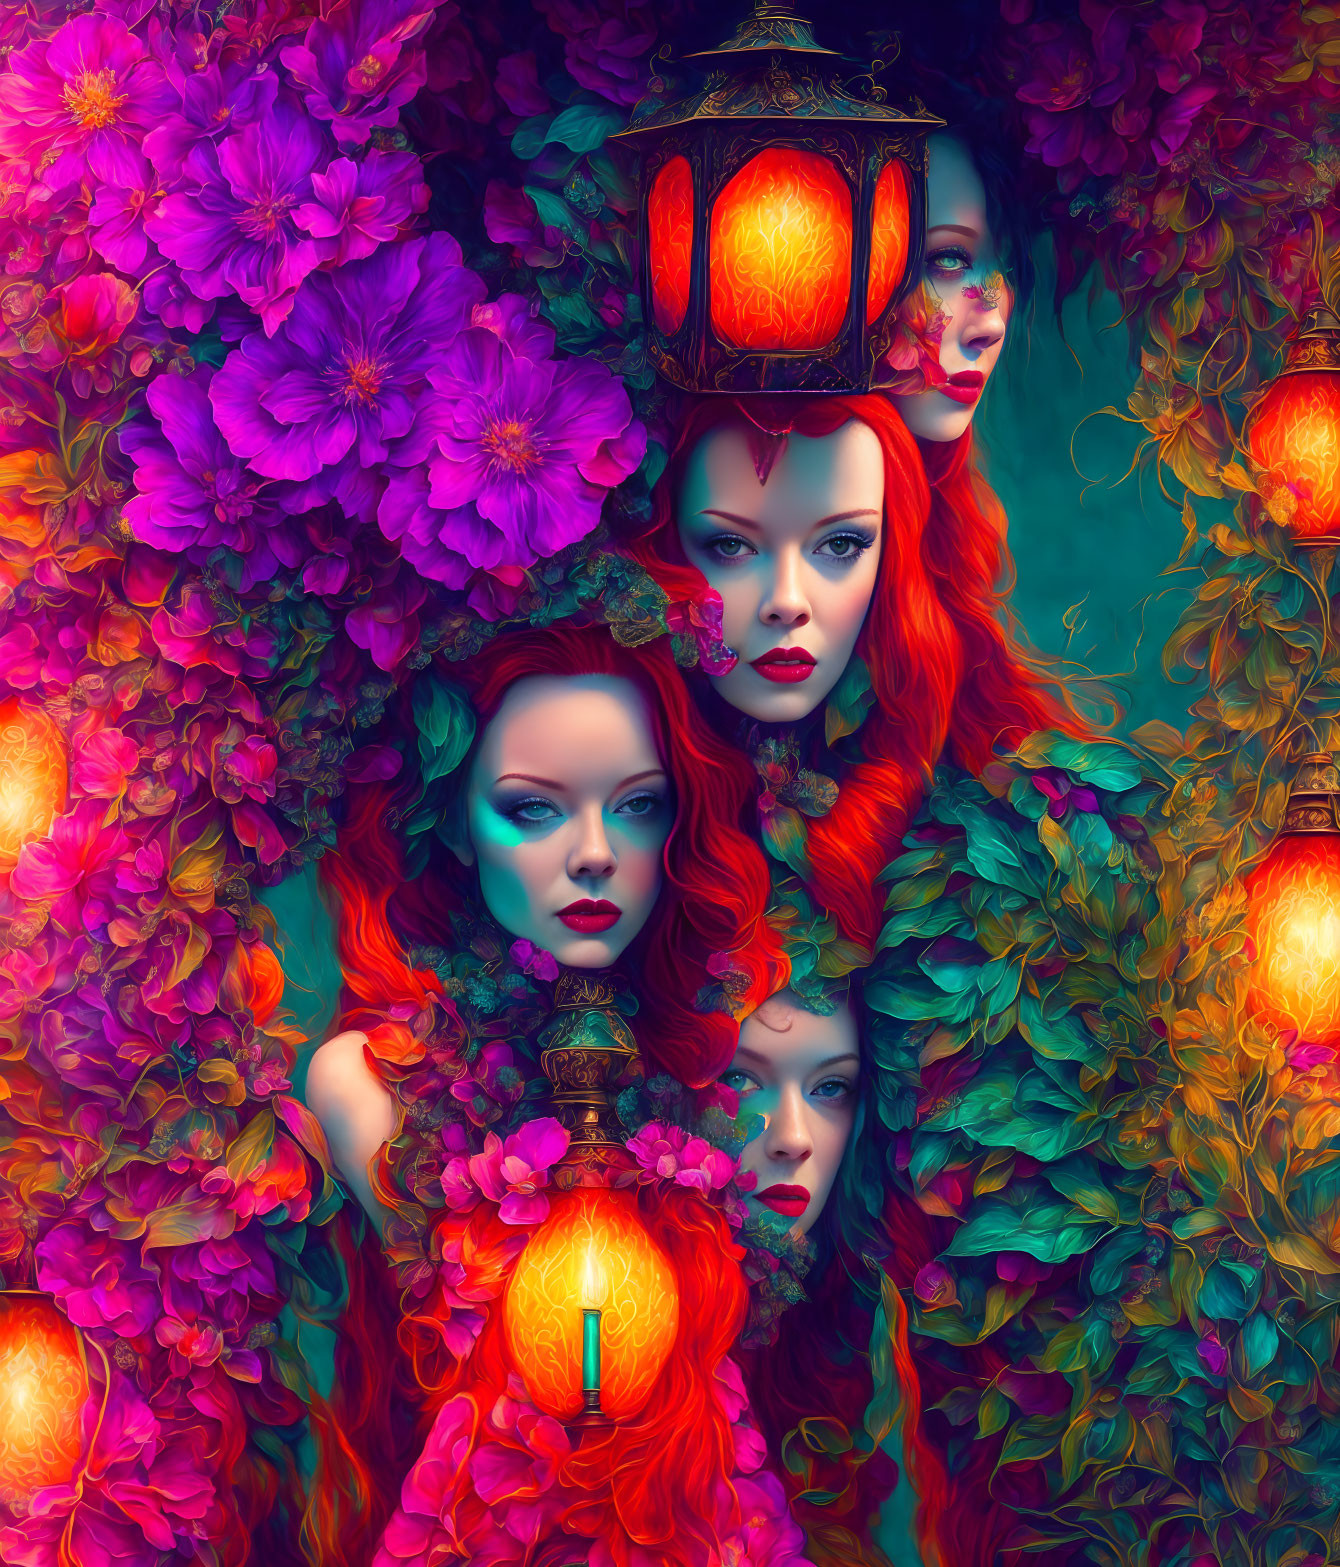 Artwork of three red-haired figures in a mystical setting with flowers and lanterns